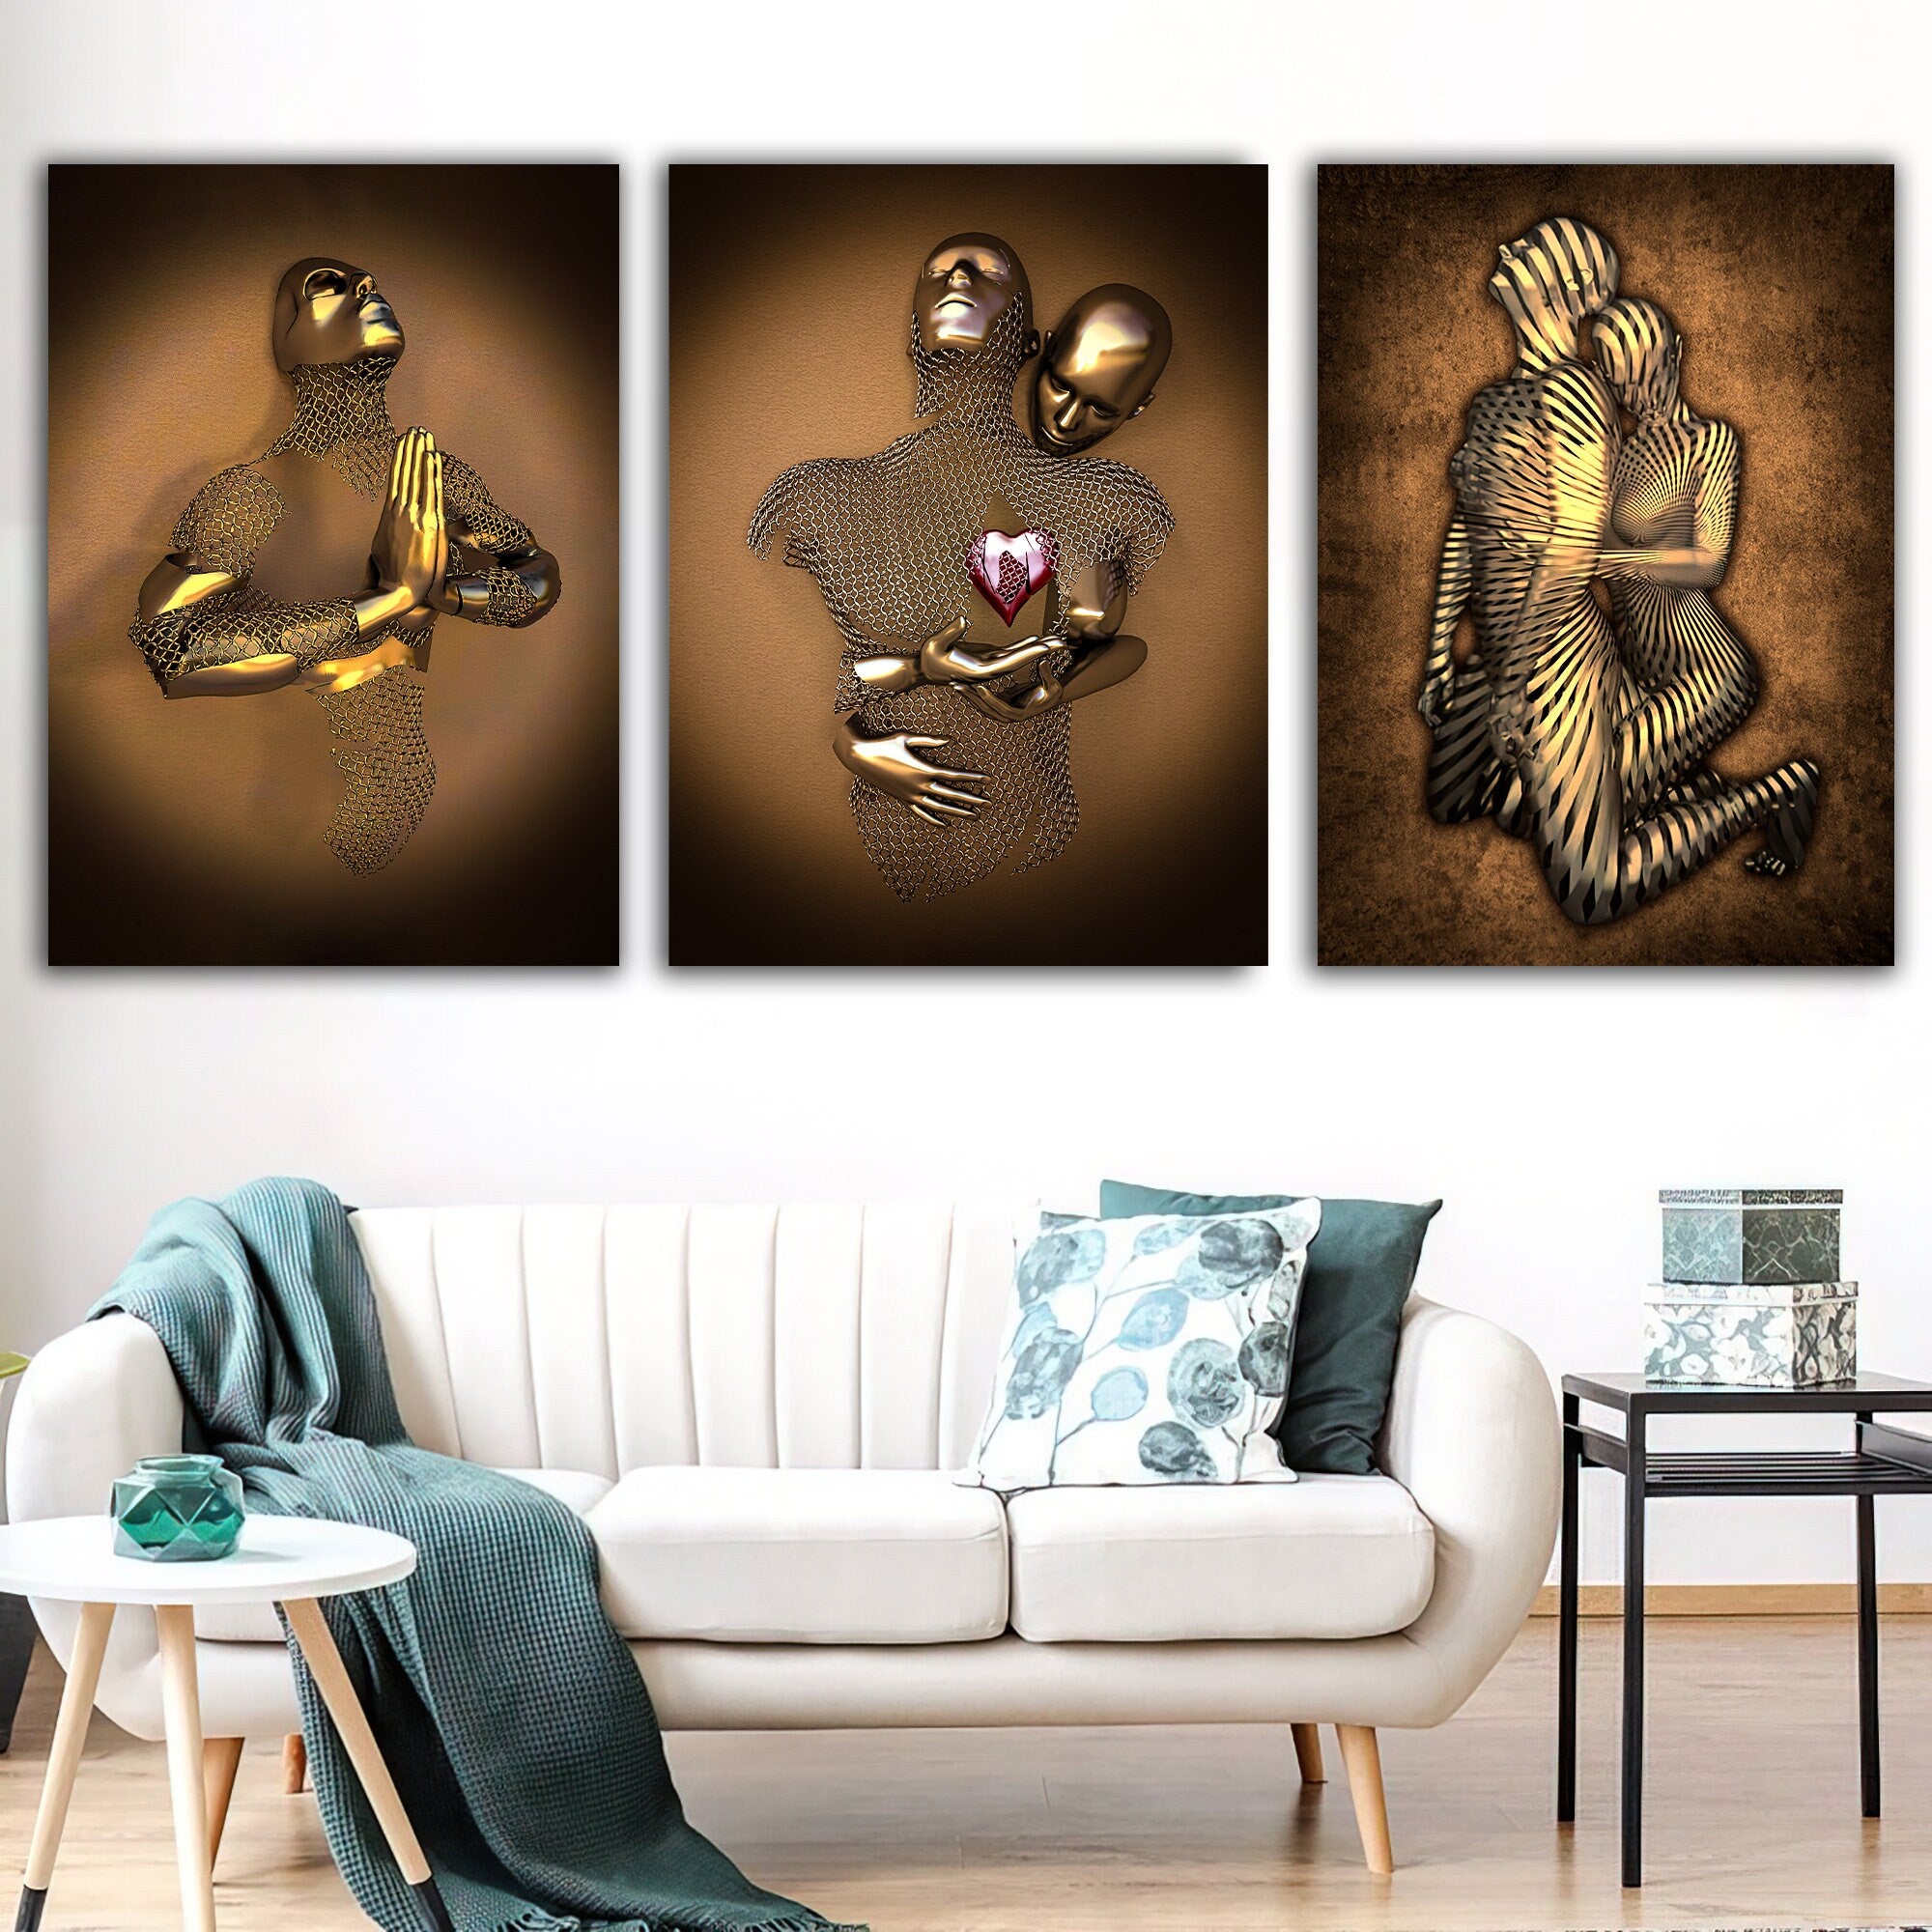 Meditation, hug, red heart canvas painting set, love couples canvas with bronze glitter texture, 3 d effect wall decor